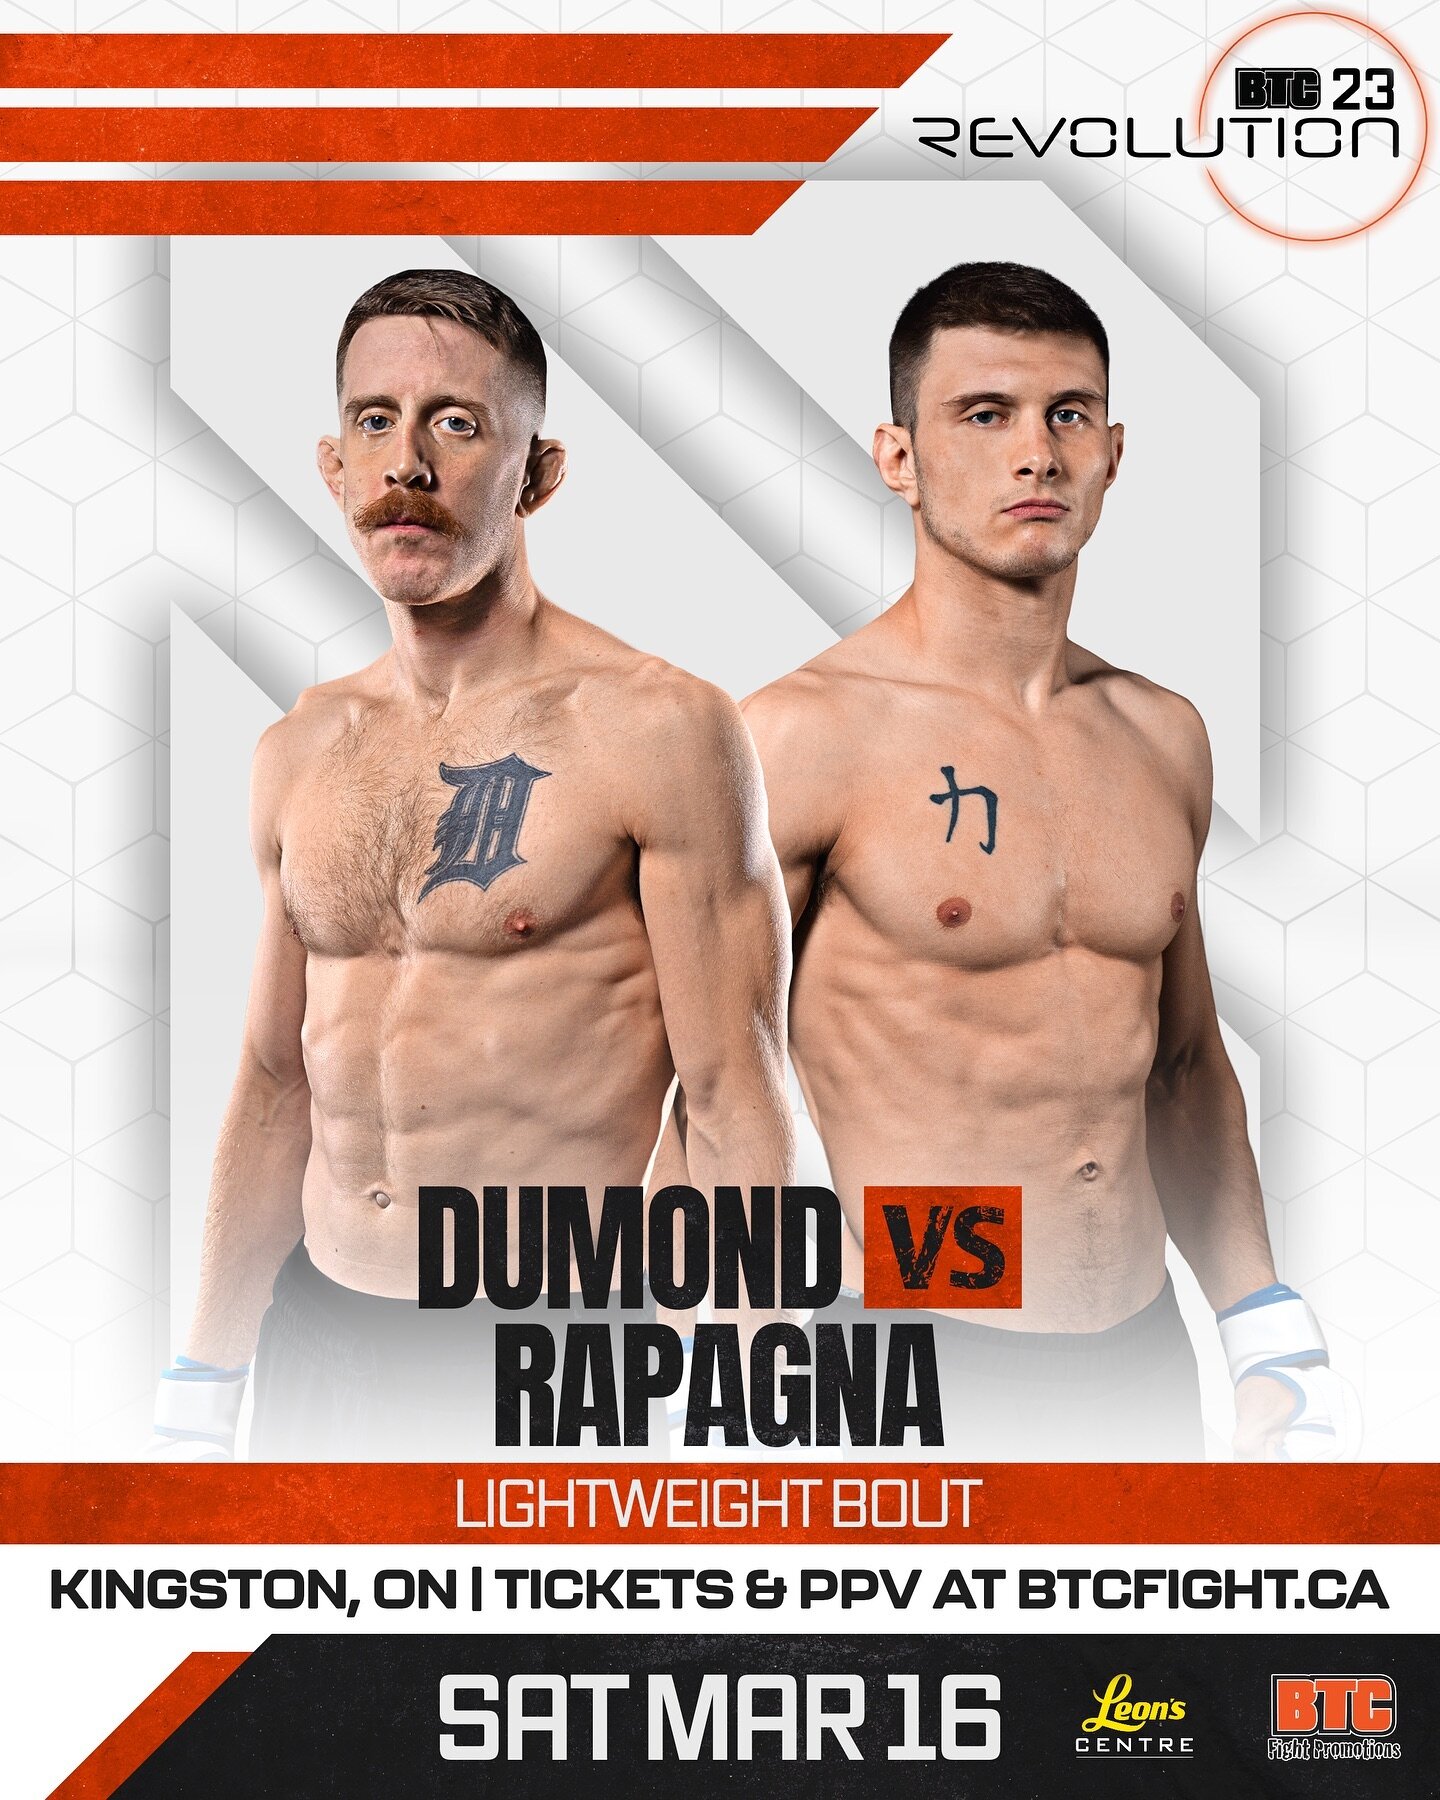 Jarred Dumond vs Davis Rapagna ⚔️ Mark your calendars for this lightweight battle at the Leon&rsquo;s Centre between @JDumond_92, with two finishes already inside the BTC Fight cage, against Evolucao Thai&rsquo;s @Davis_Rapagna at #BTC23 #Kingston #L